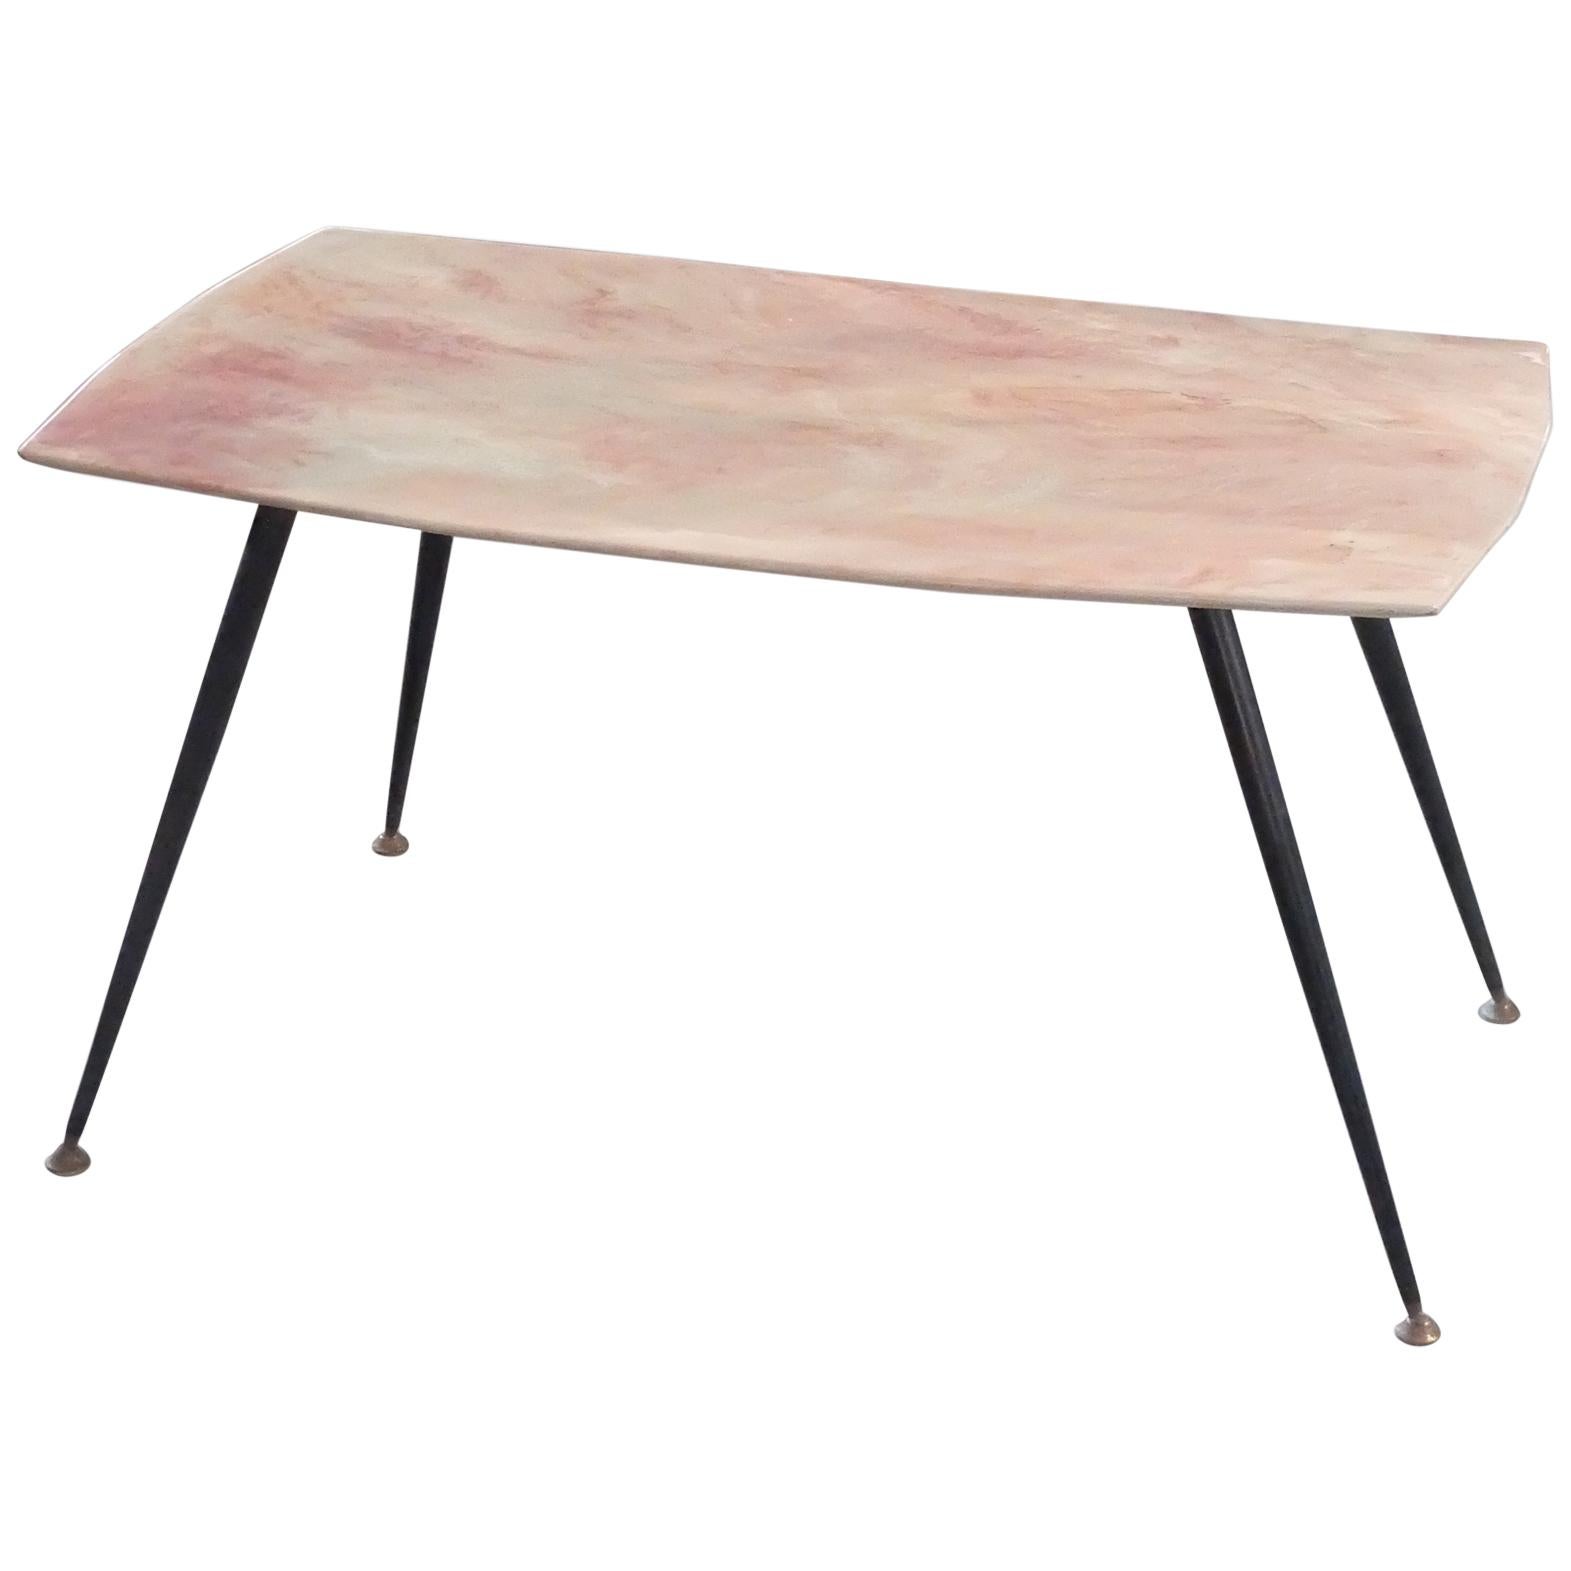 Italian Mid-Century Modern, Pink Marble Top Coffee Table in Marble, circa 1950